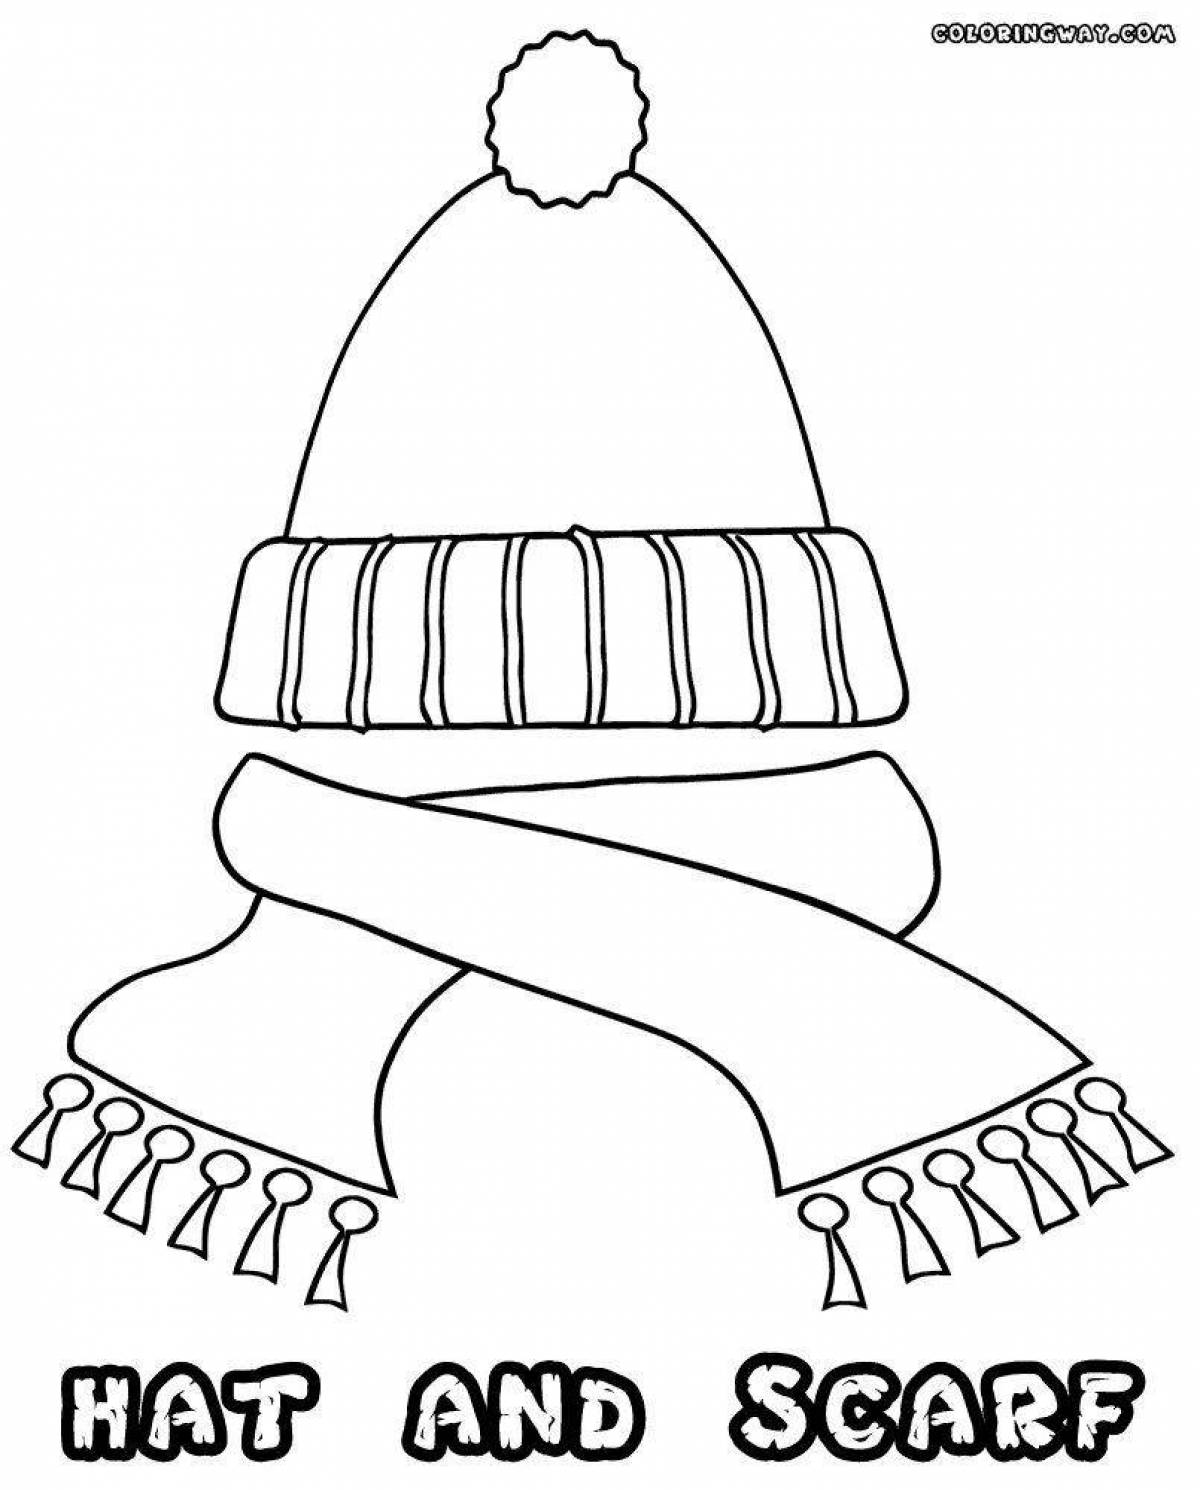 Sparkly hat and scarf student coloring book